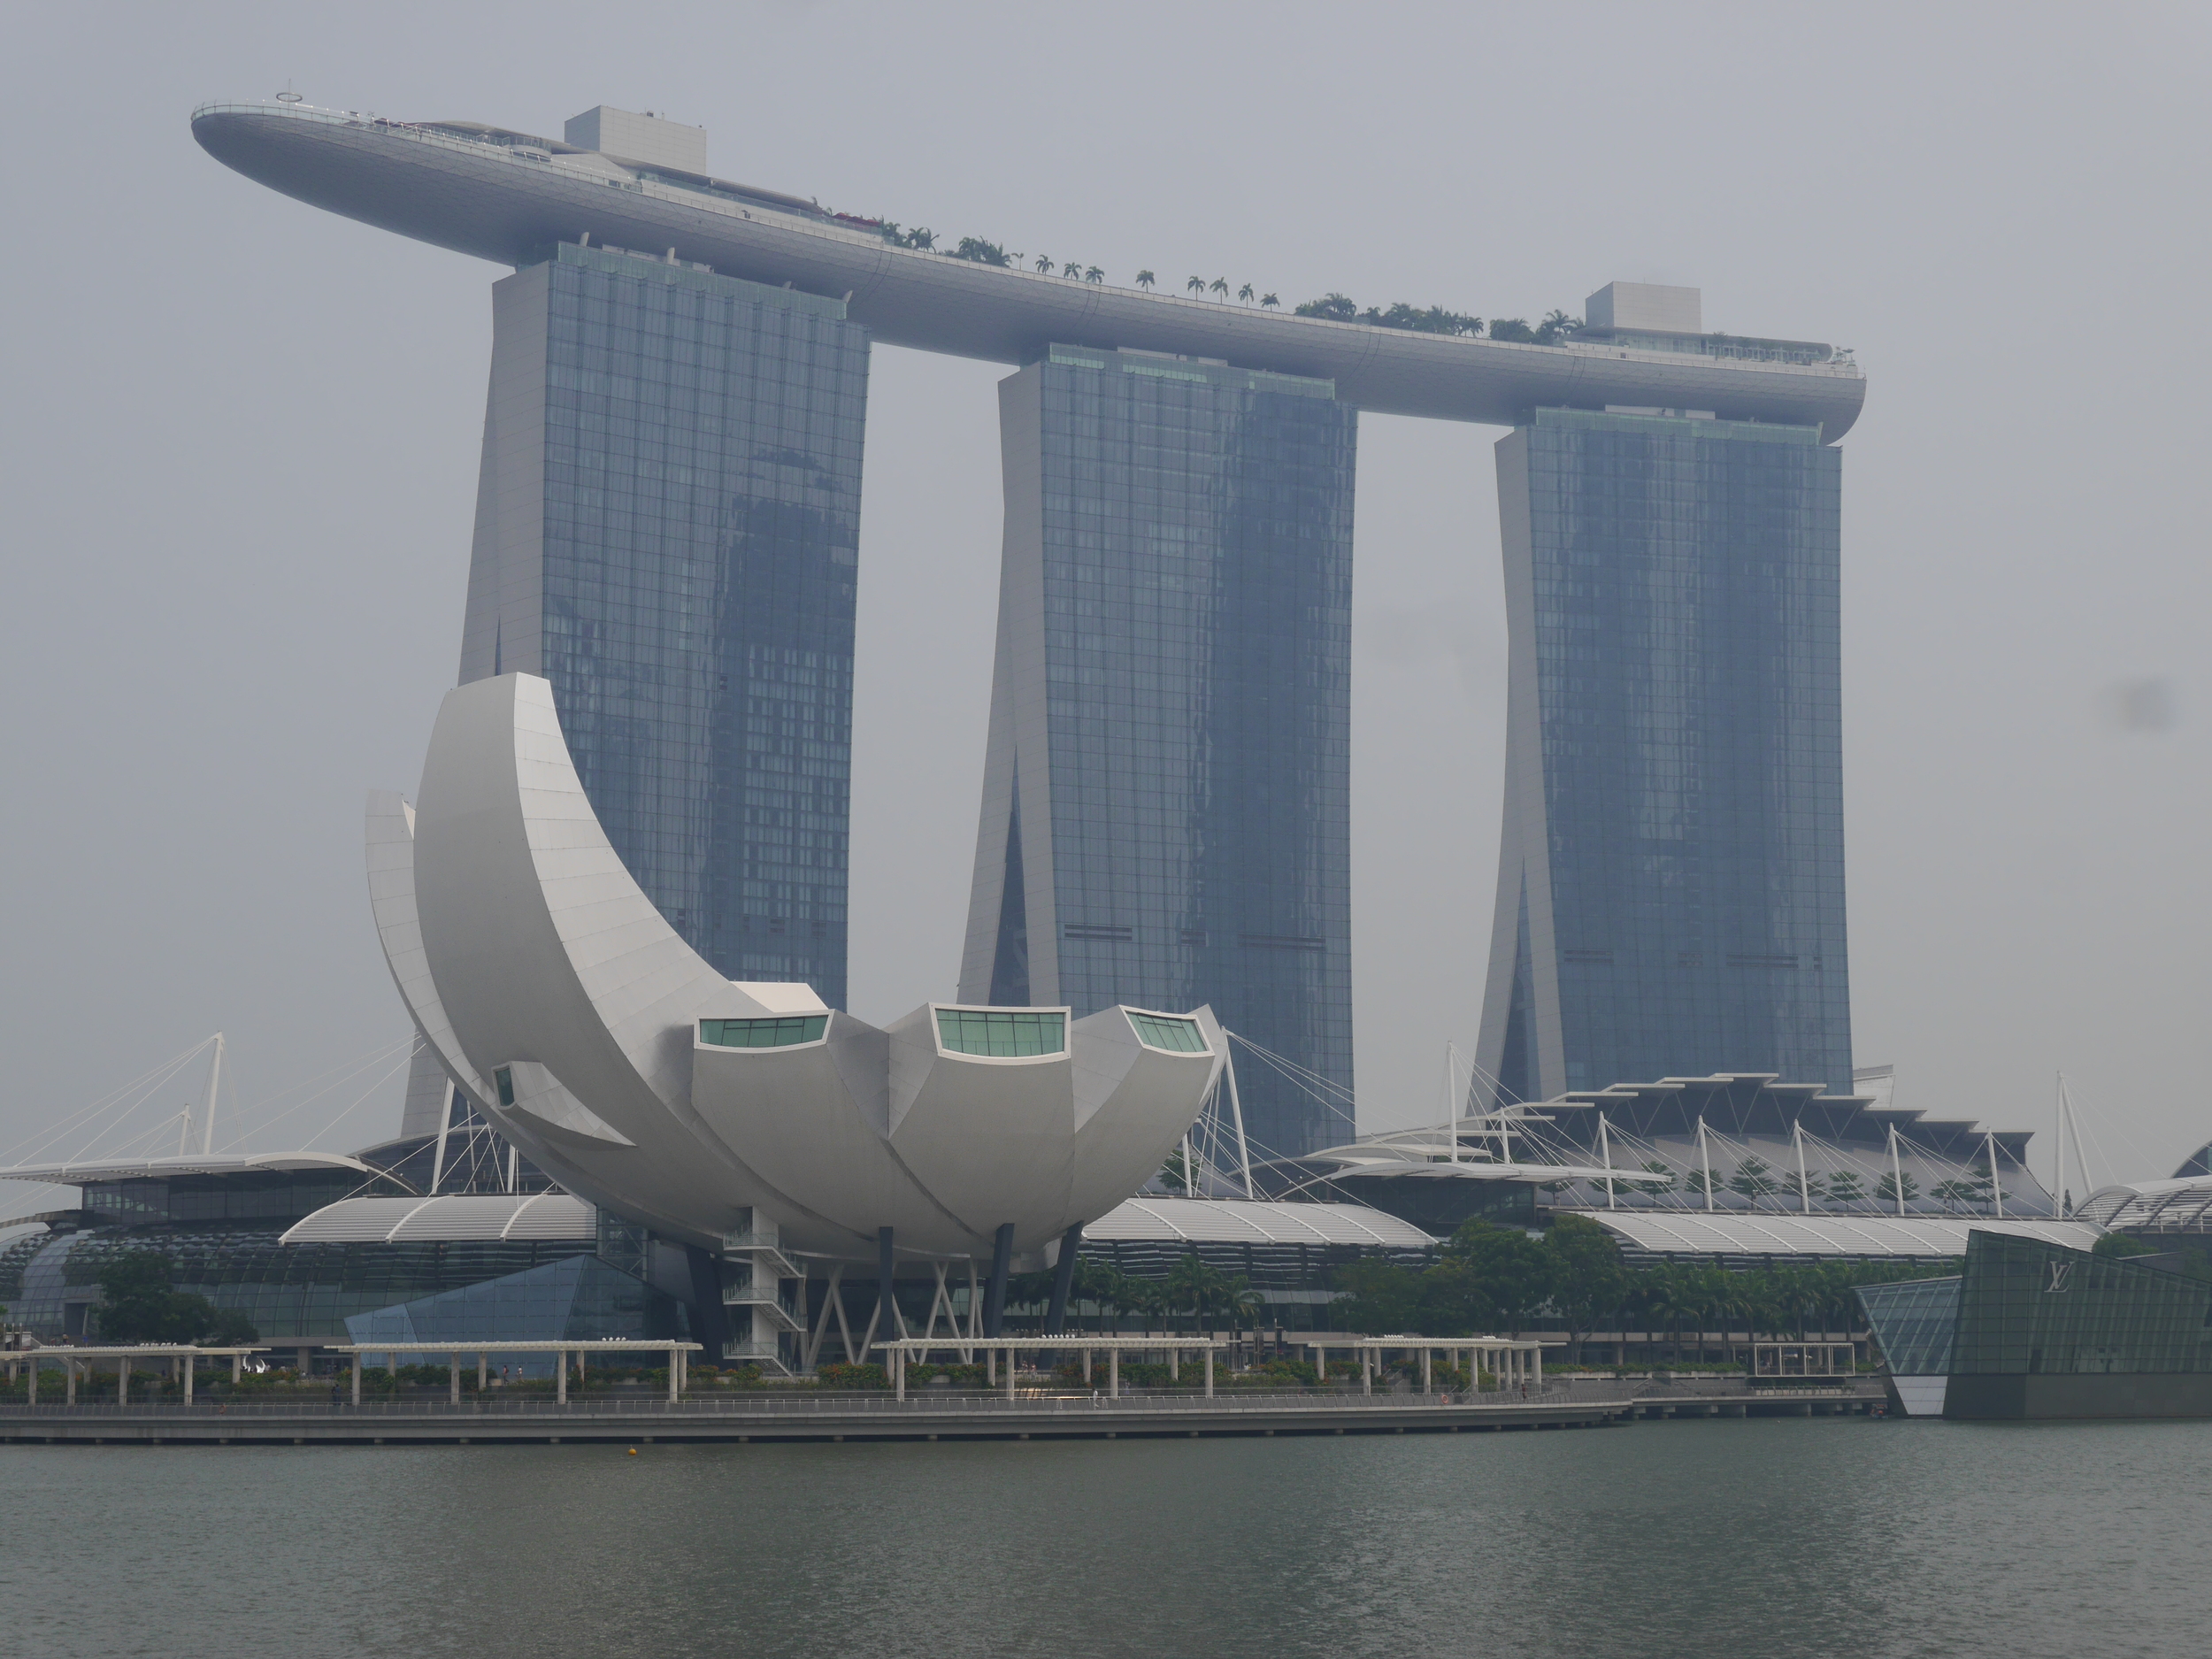  The Marina Bay Sands Hotel with the ArtScience Museum in the foreground. 